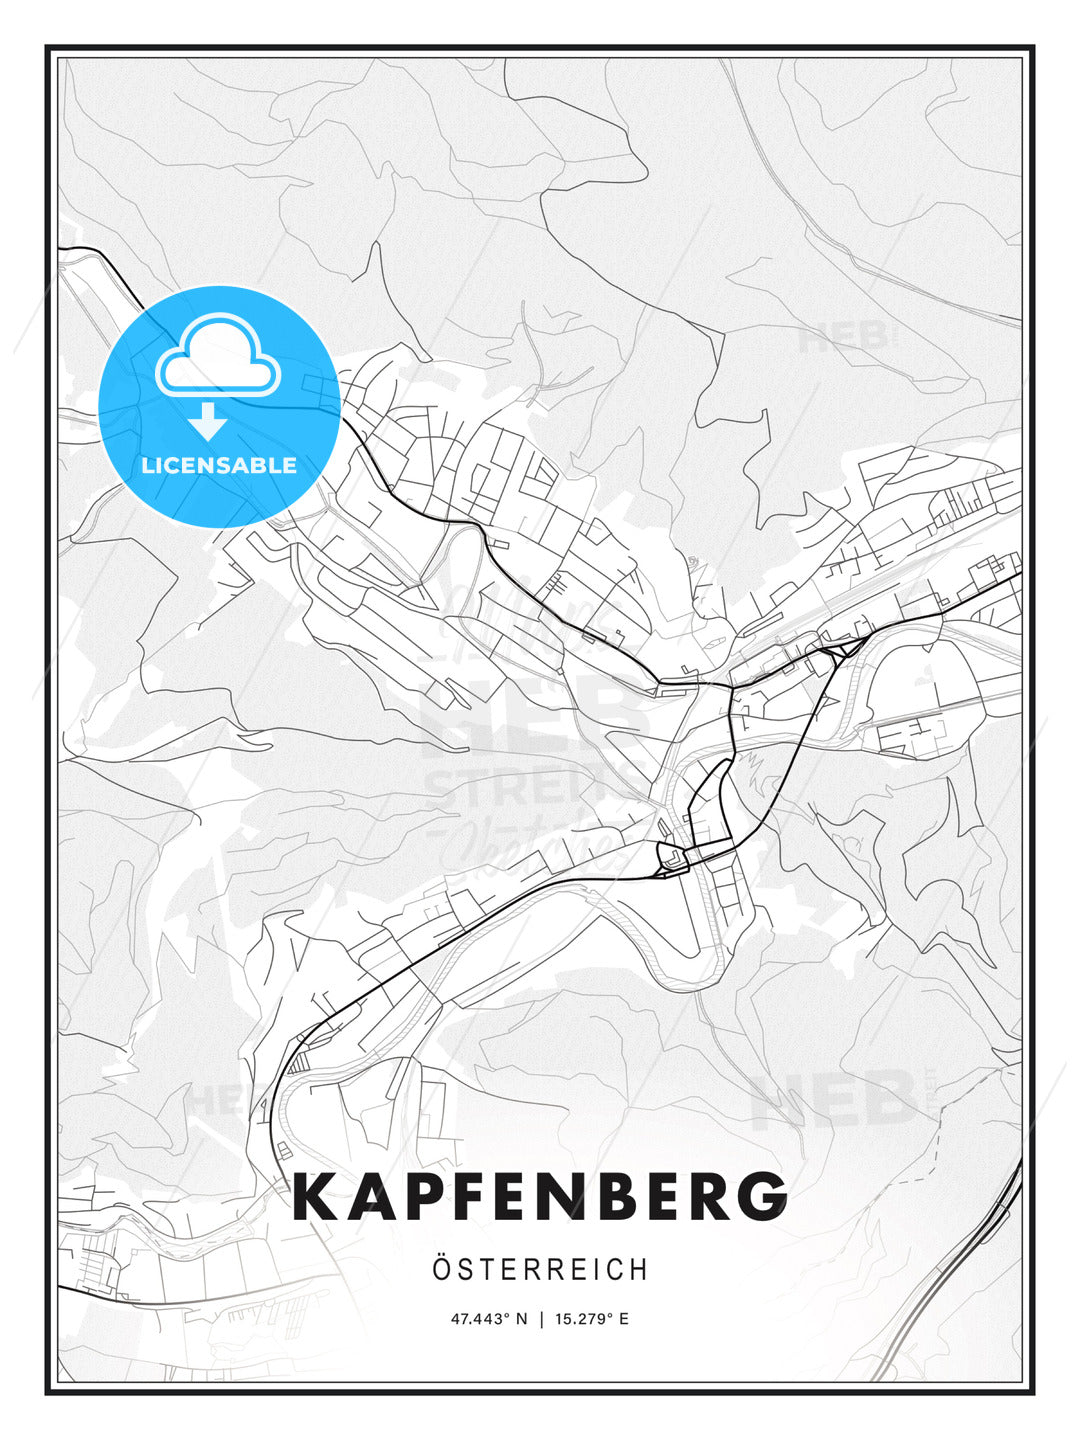 Kapfenberg, Austria, Modern Print Template in Various Formats - HEBSTREITS Sketches